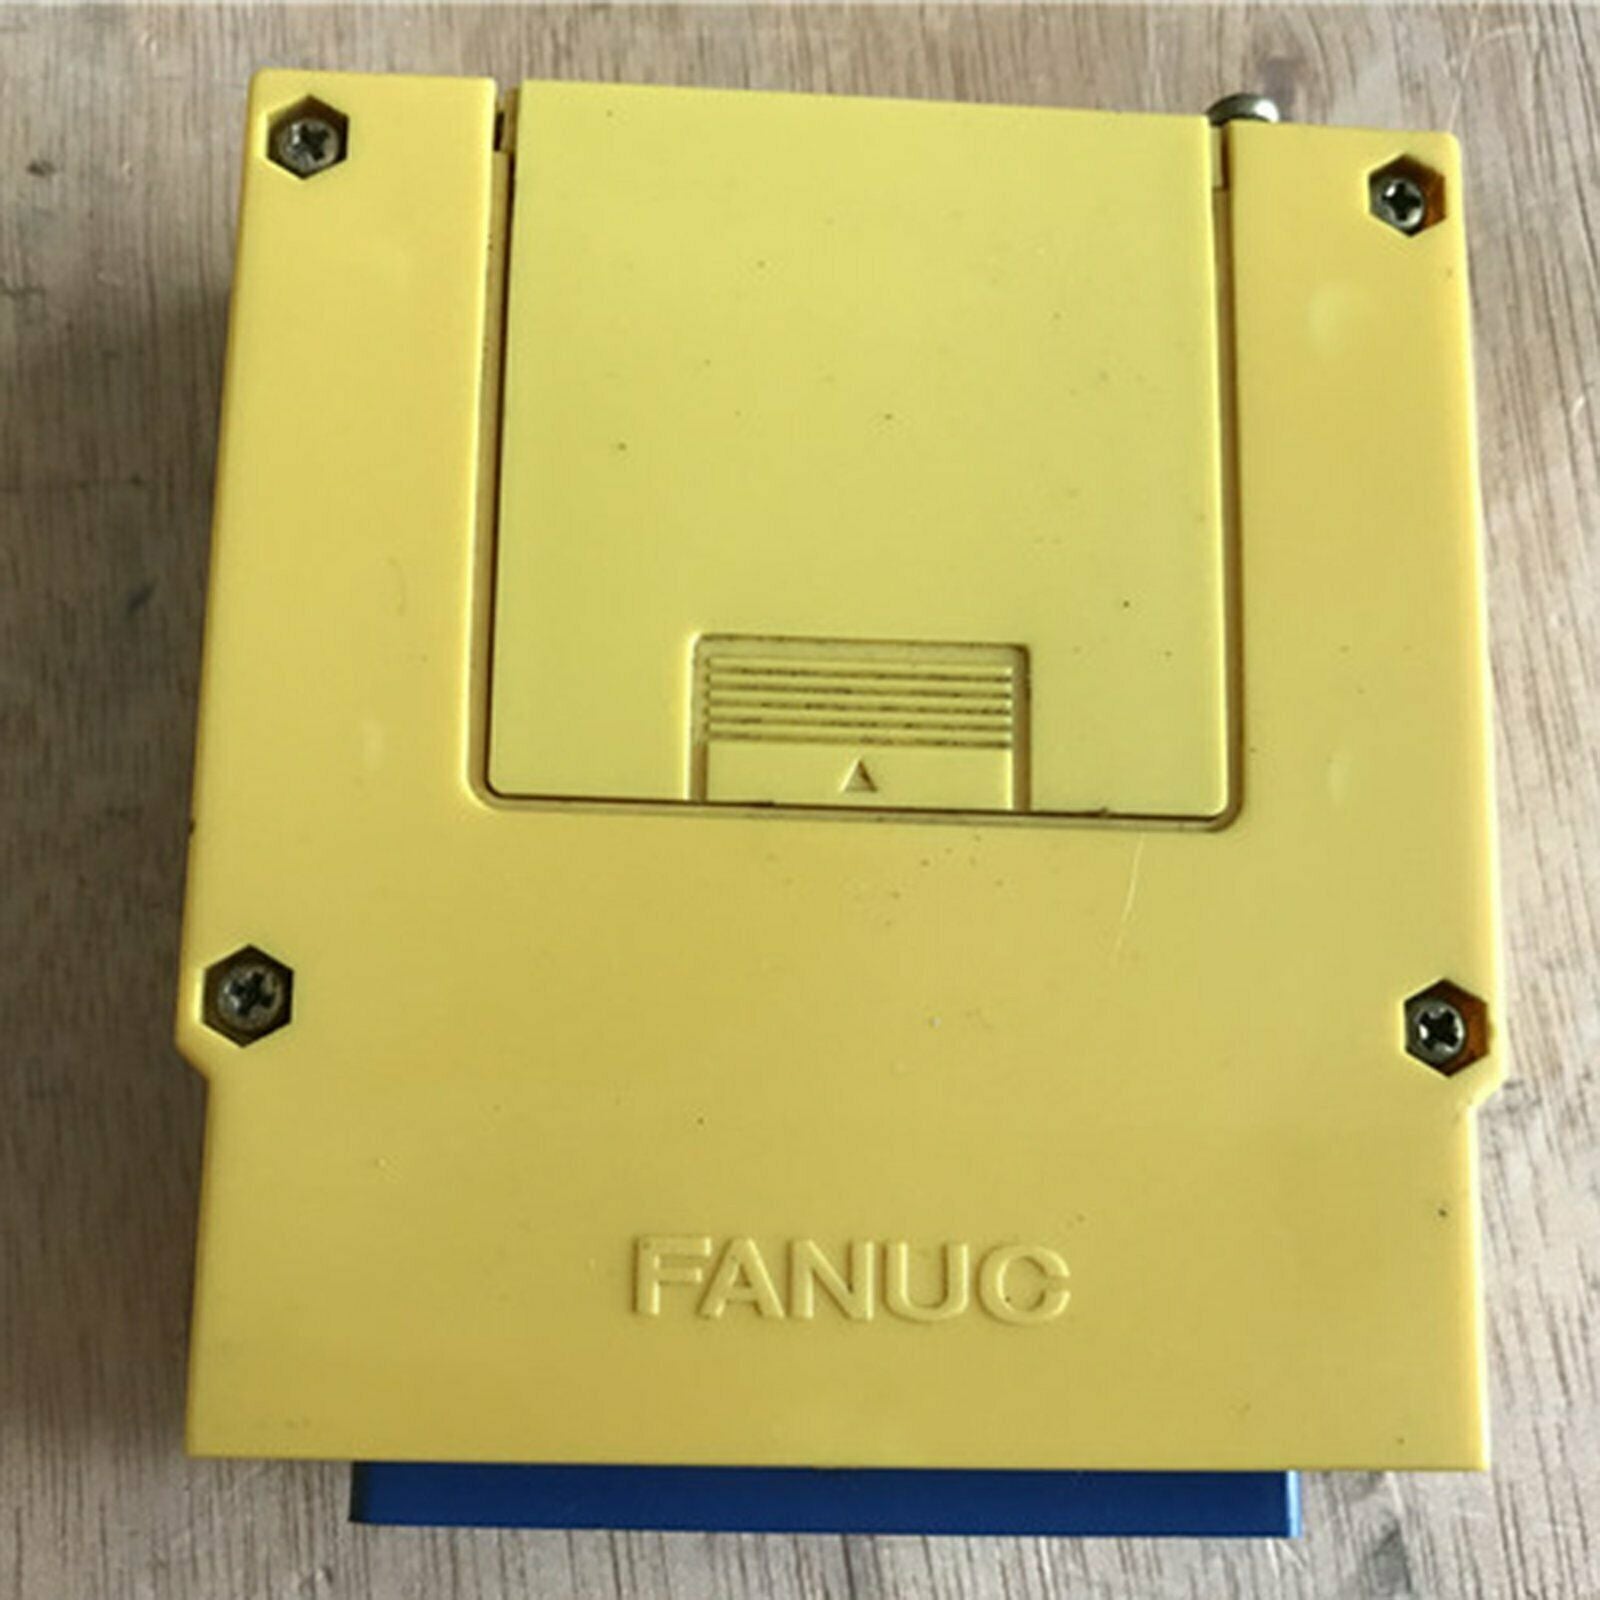 used One  For Fanuc A02B-0091-C113 lO board Tested in Good Condition